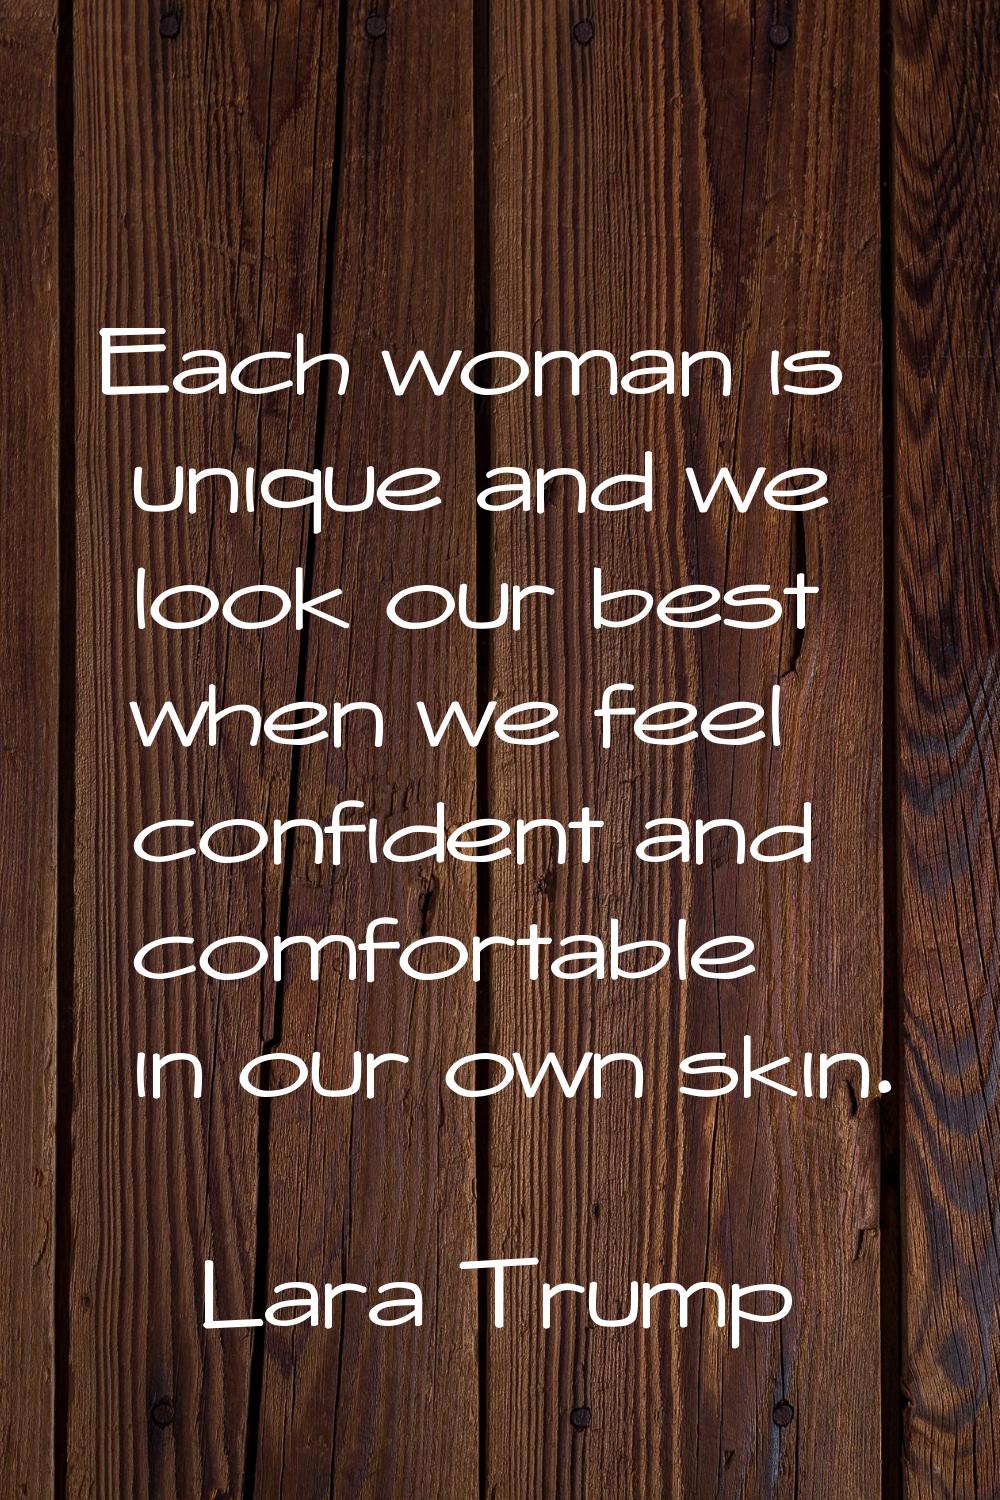 Each woman is unique and we look our best when we feel confident and comfortable in our own skin.